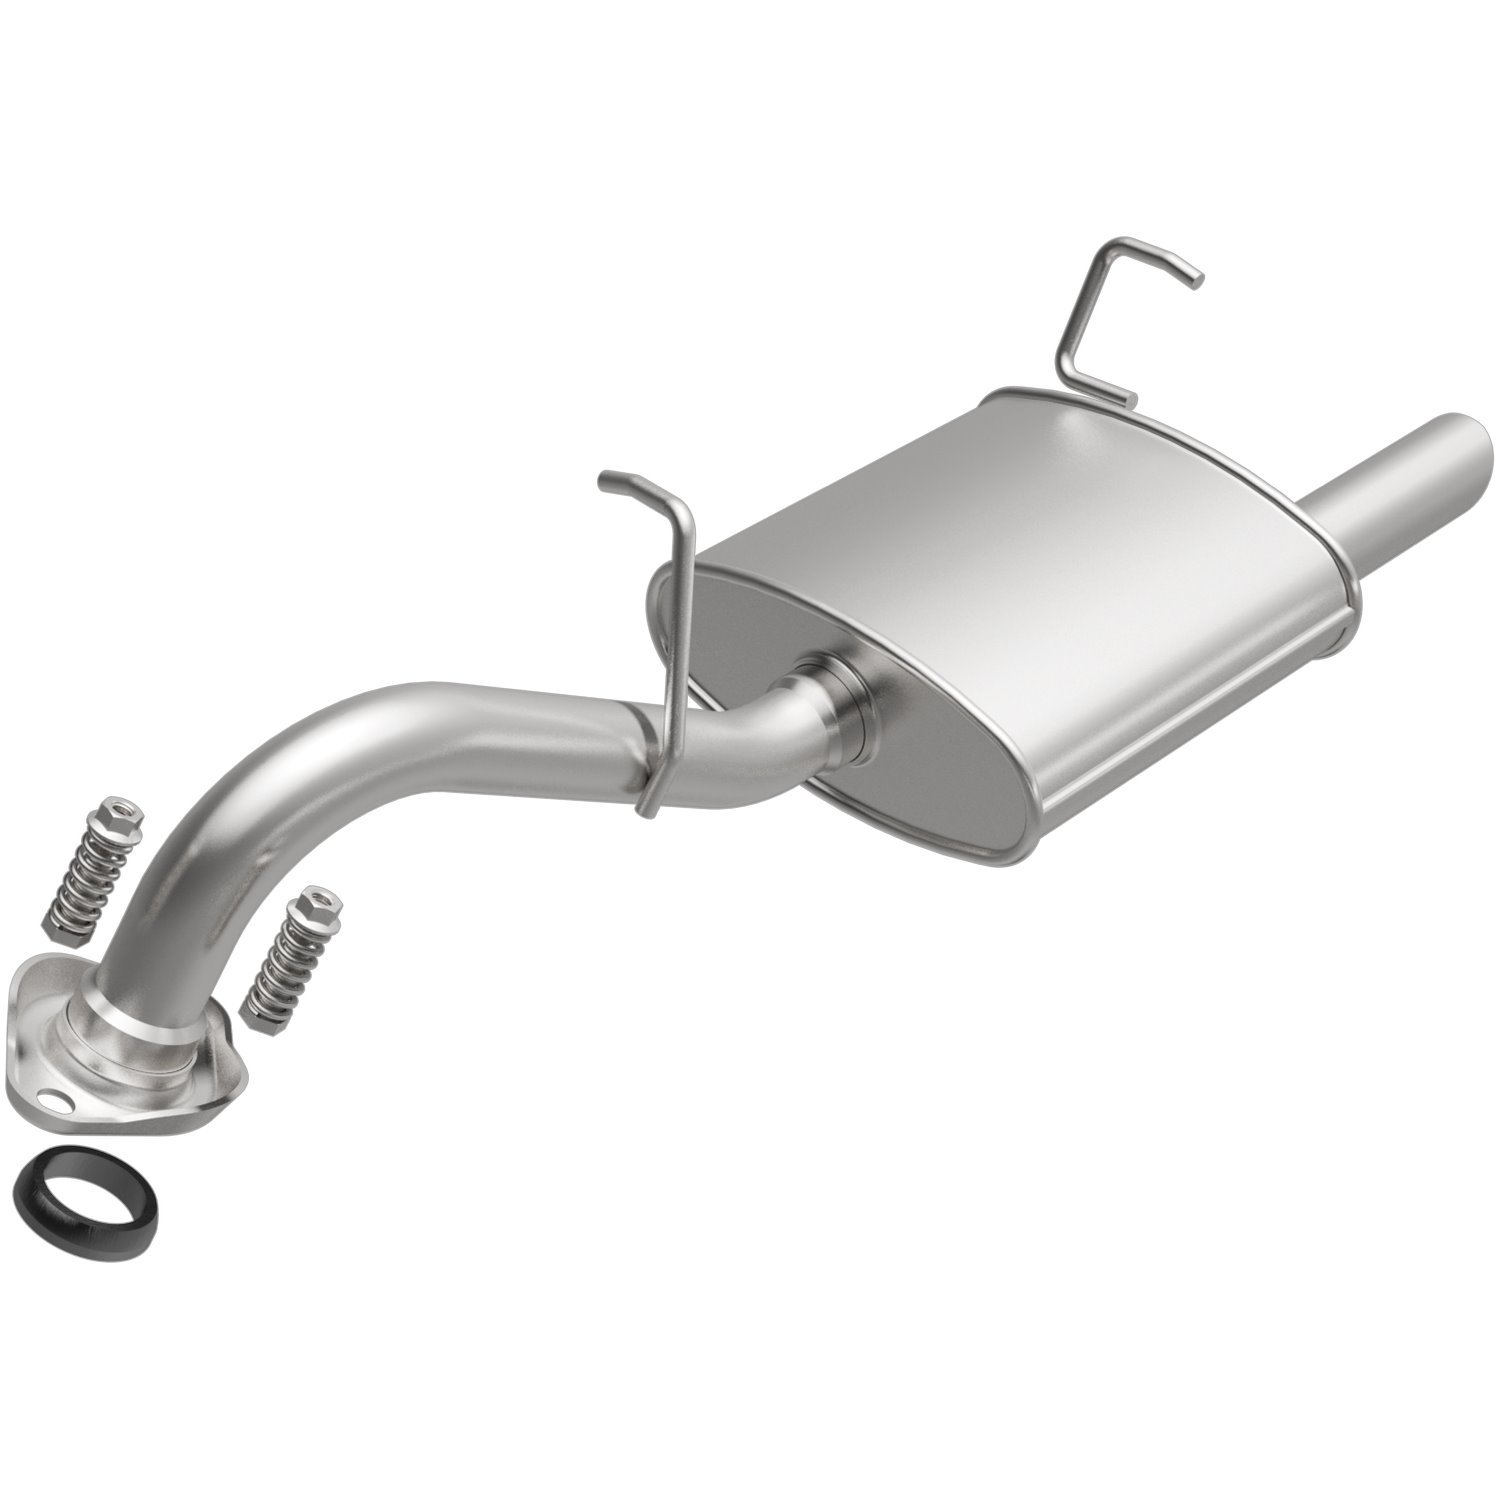 Direct-Fit Exhaust Kit, 2007-2015 Toyota Yaris 1.5L